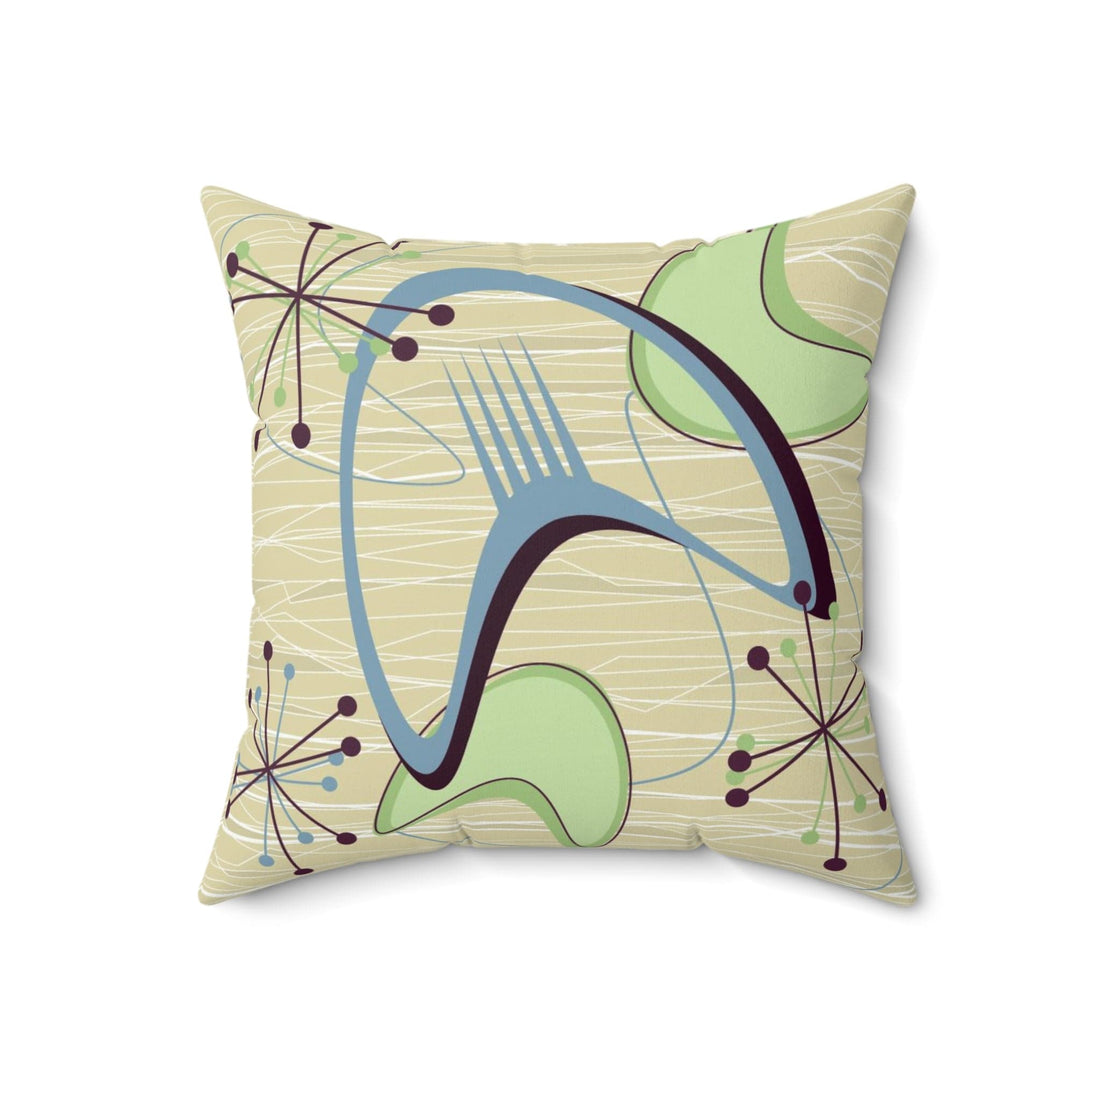 Kate McEnroe New York 1950s Atomic Boomerang Mid Century Modern Throw Pillow in Retro Vintage Beige, Blue, Green Geometric Starbursts, MCM Abstract Accent PillowThrow Pillows18545395407889238851